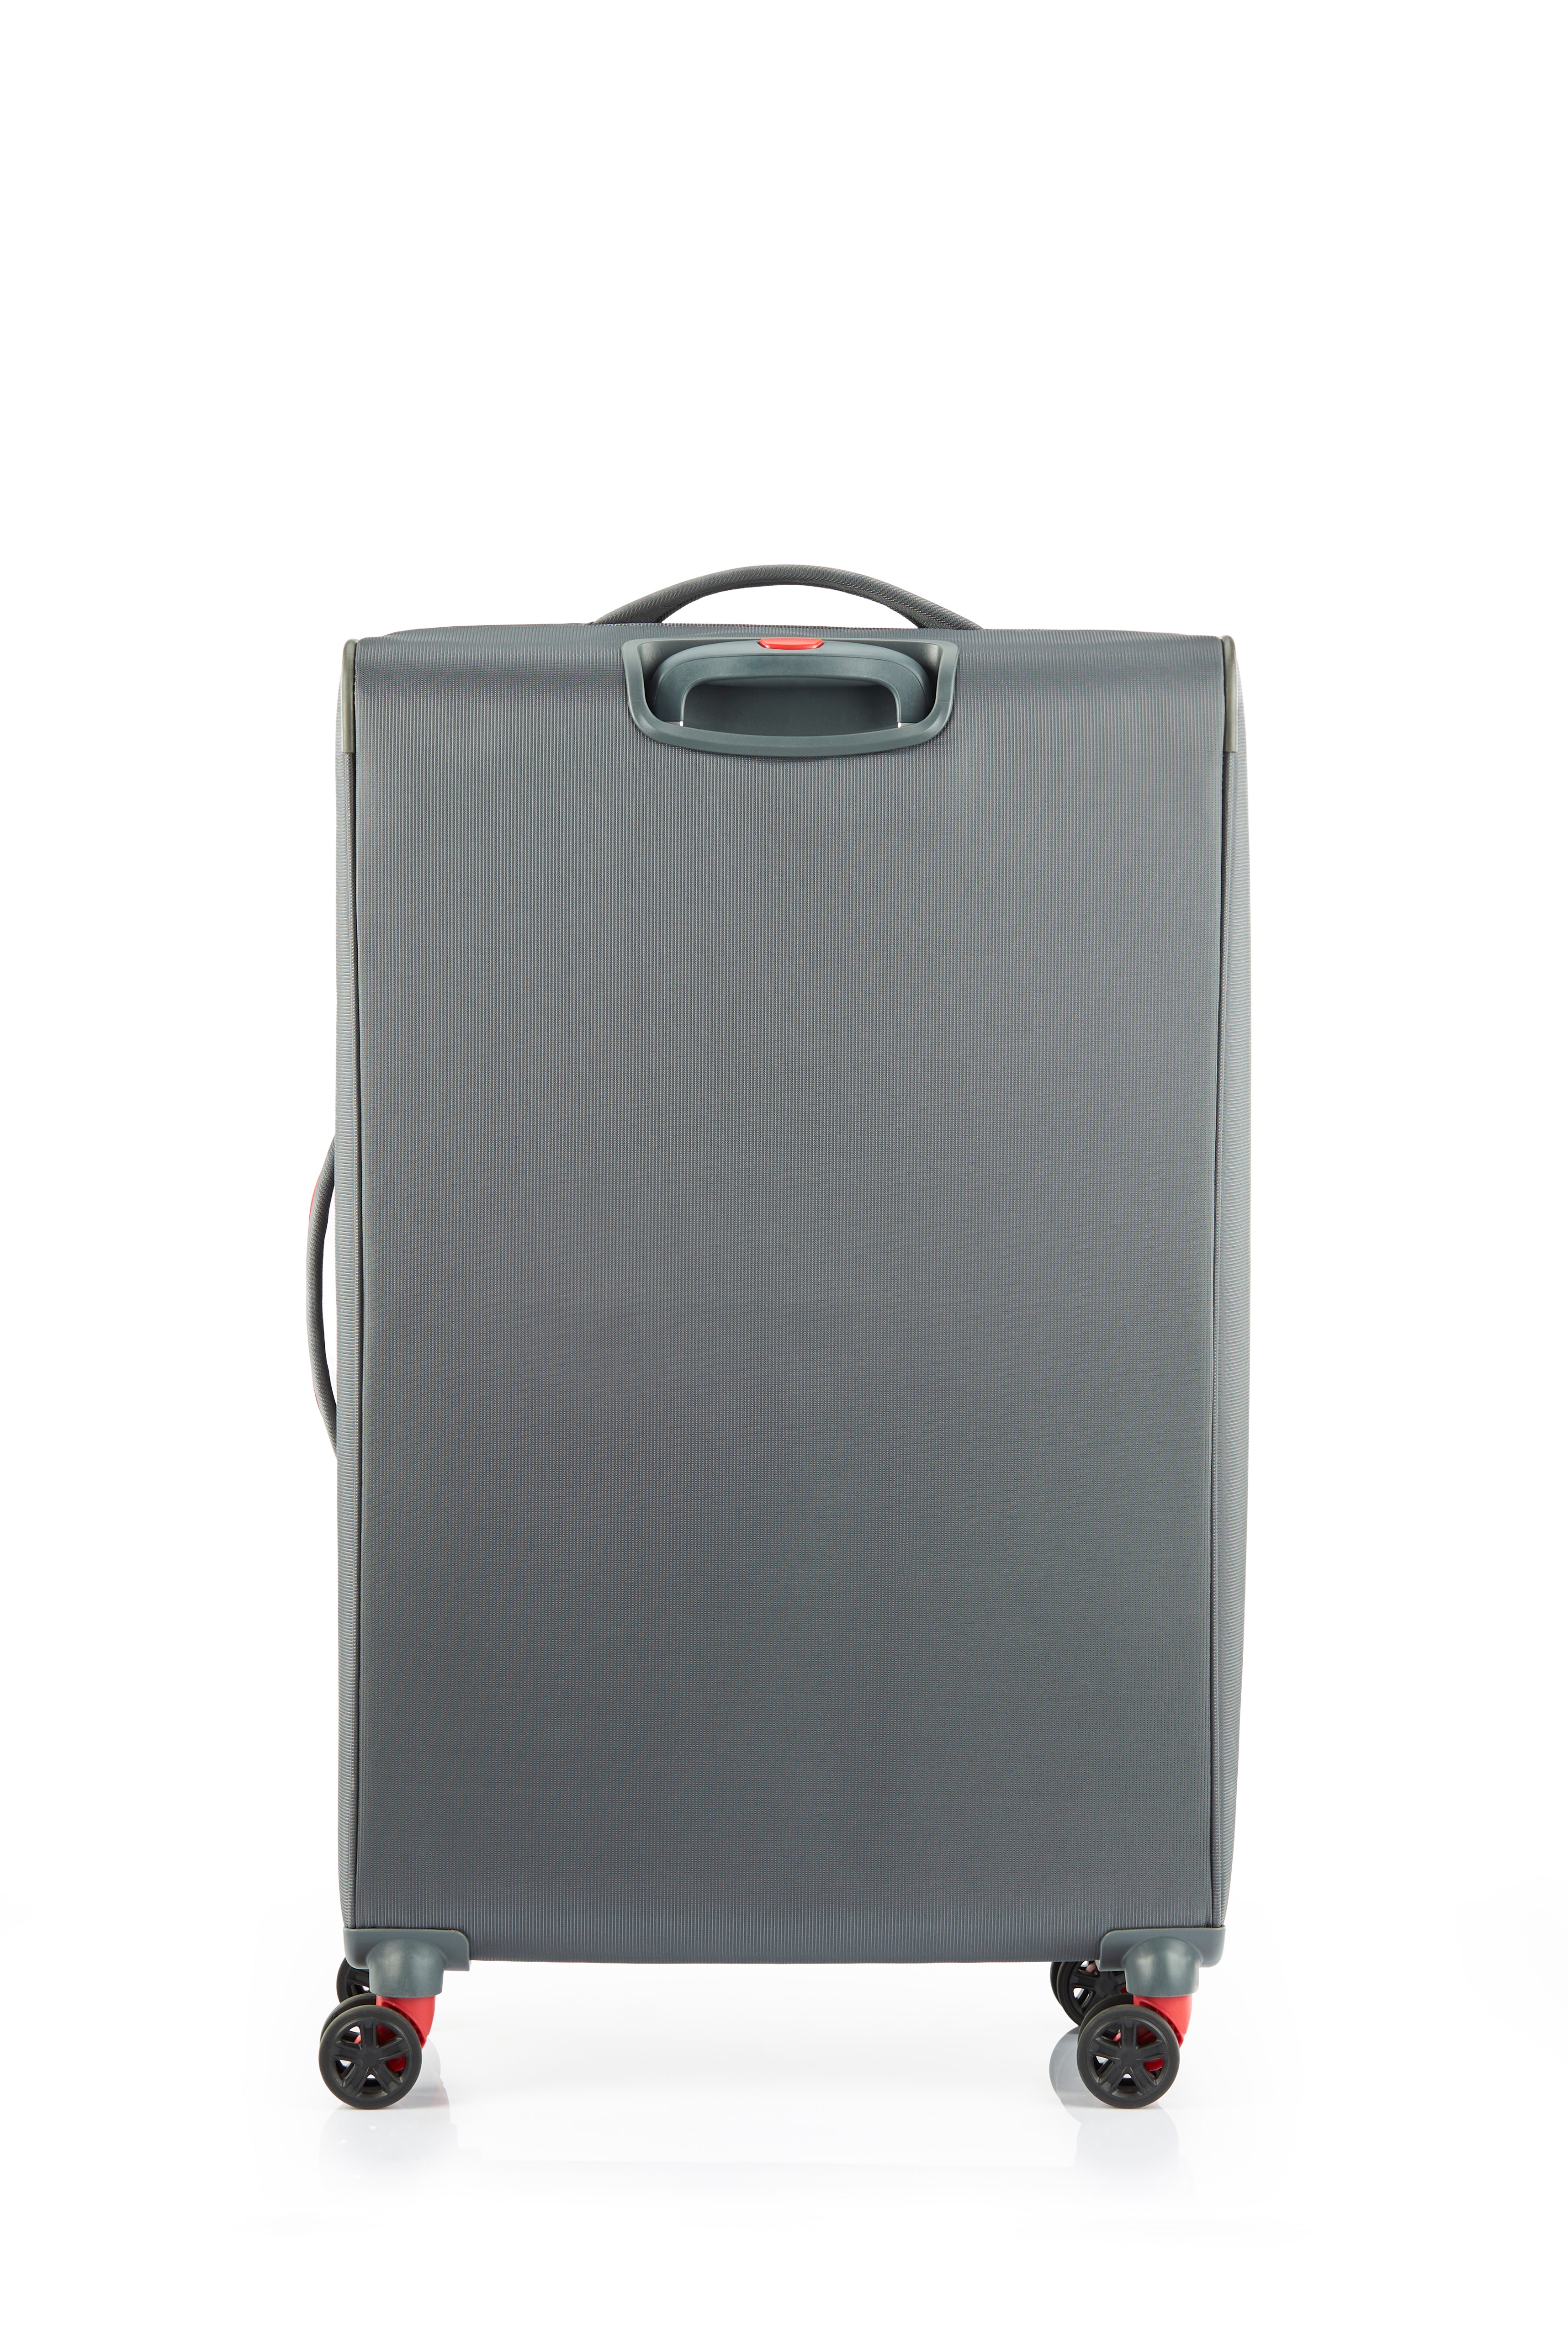 American Tourister - Applite ECO 82cm Large Suitcase - Grey/Red-5